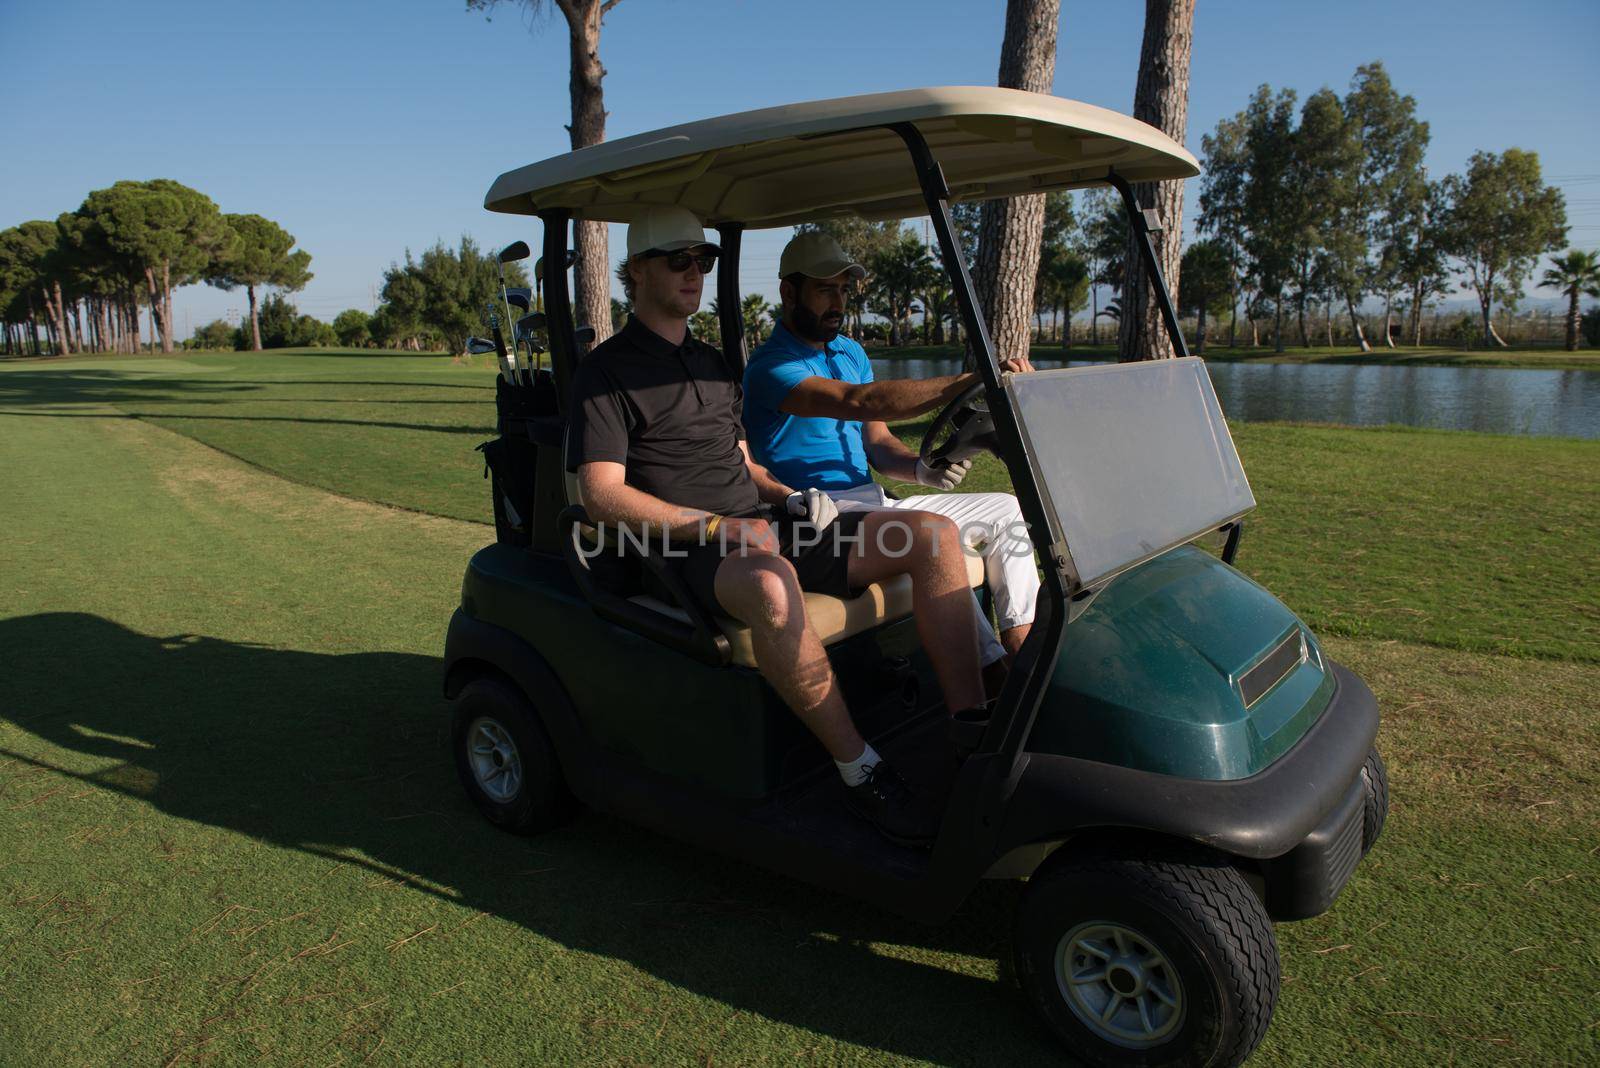 golf players driving cart at course on beautiful morning sunrise. friends together have fun and relax on vacation.